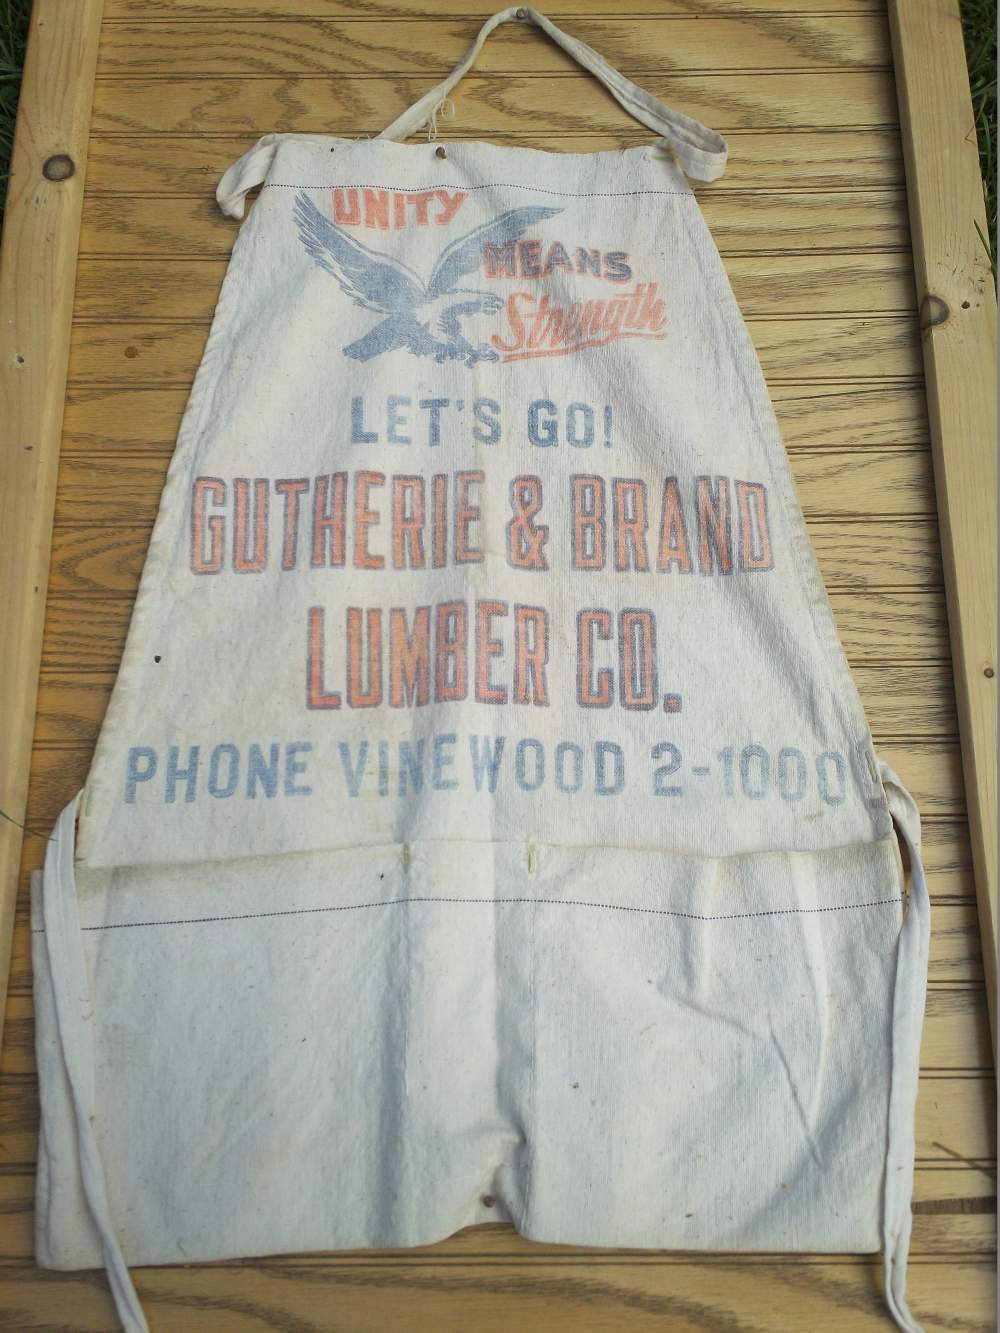 Name:  GLC Gutherie and Brand Lumber.jpg
Views: 796
Size:  142.7 KB